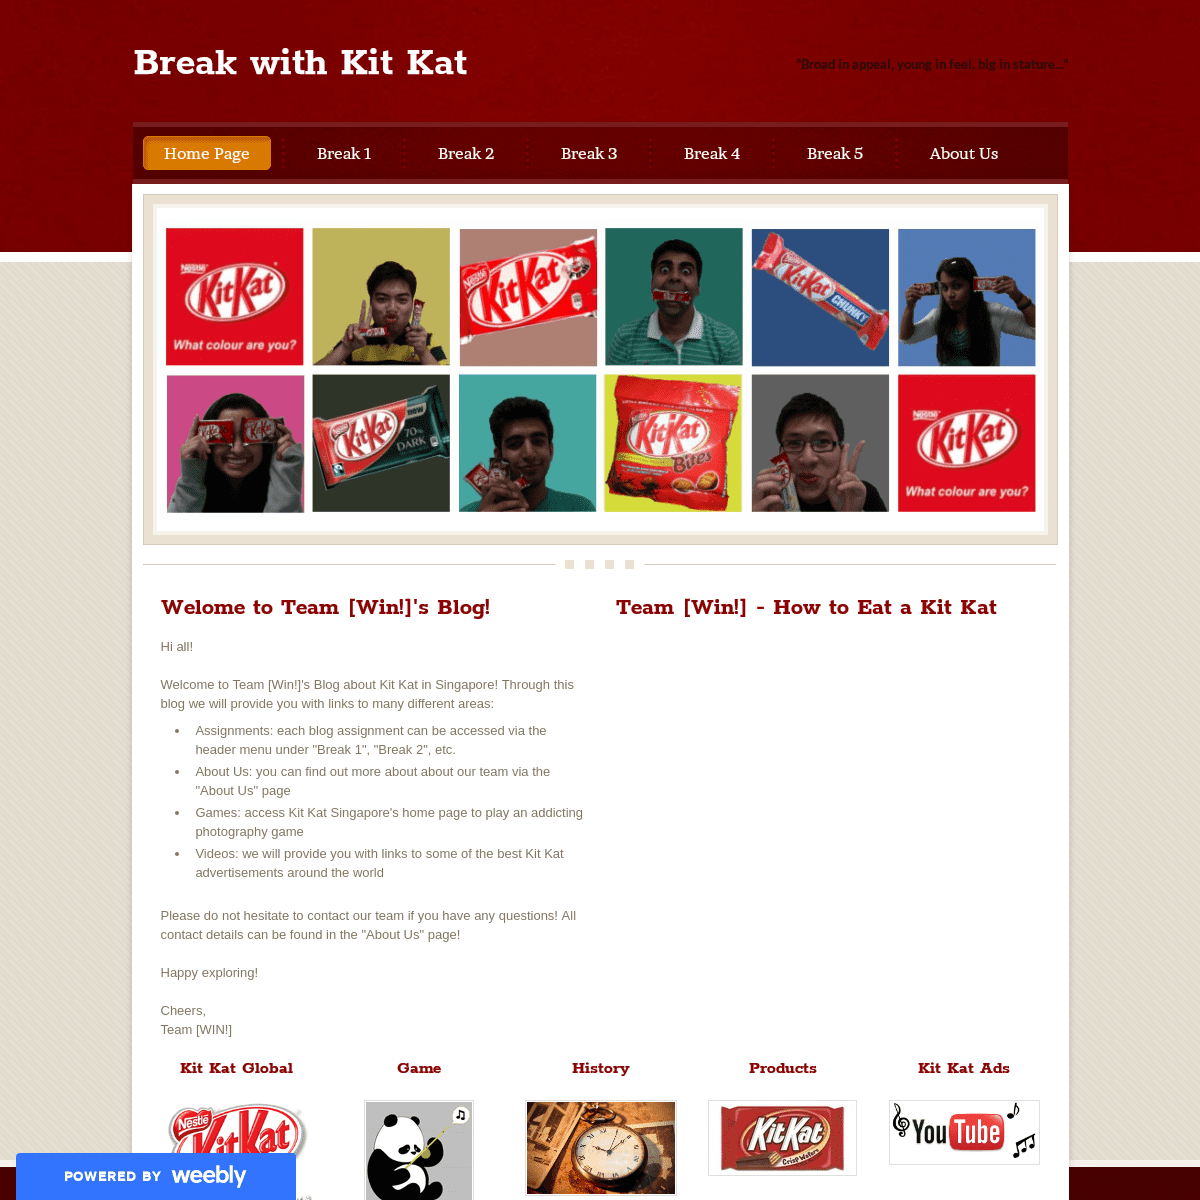 Break with Kit Kat - Home Page